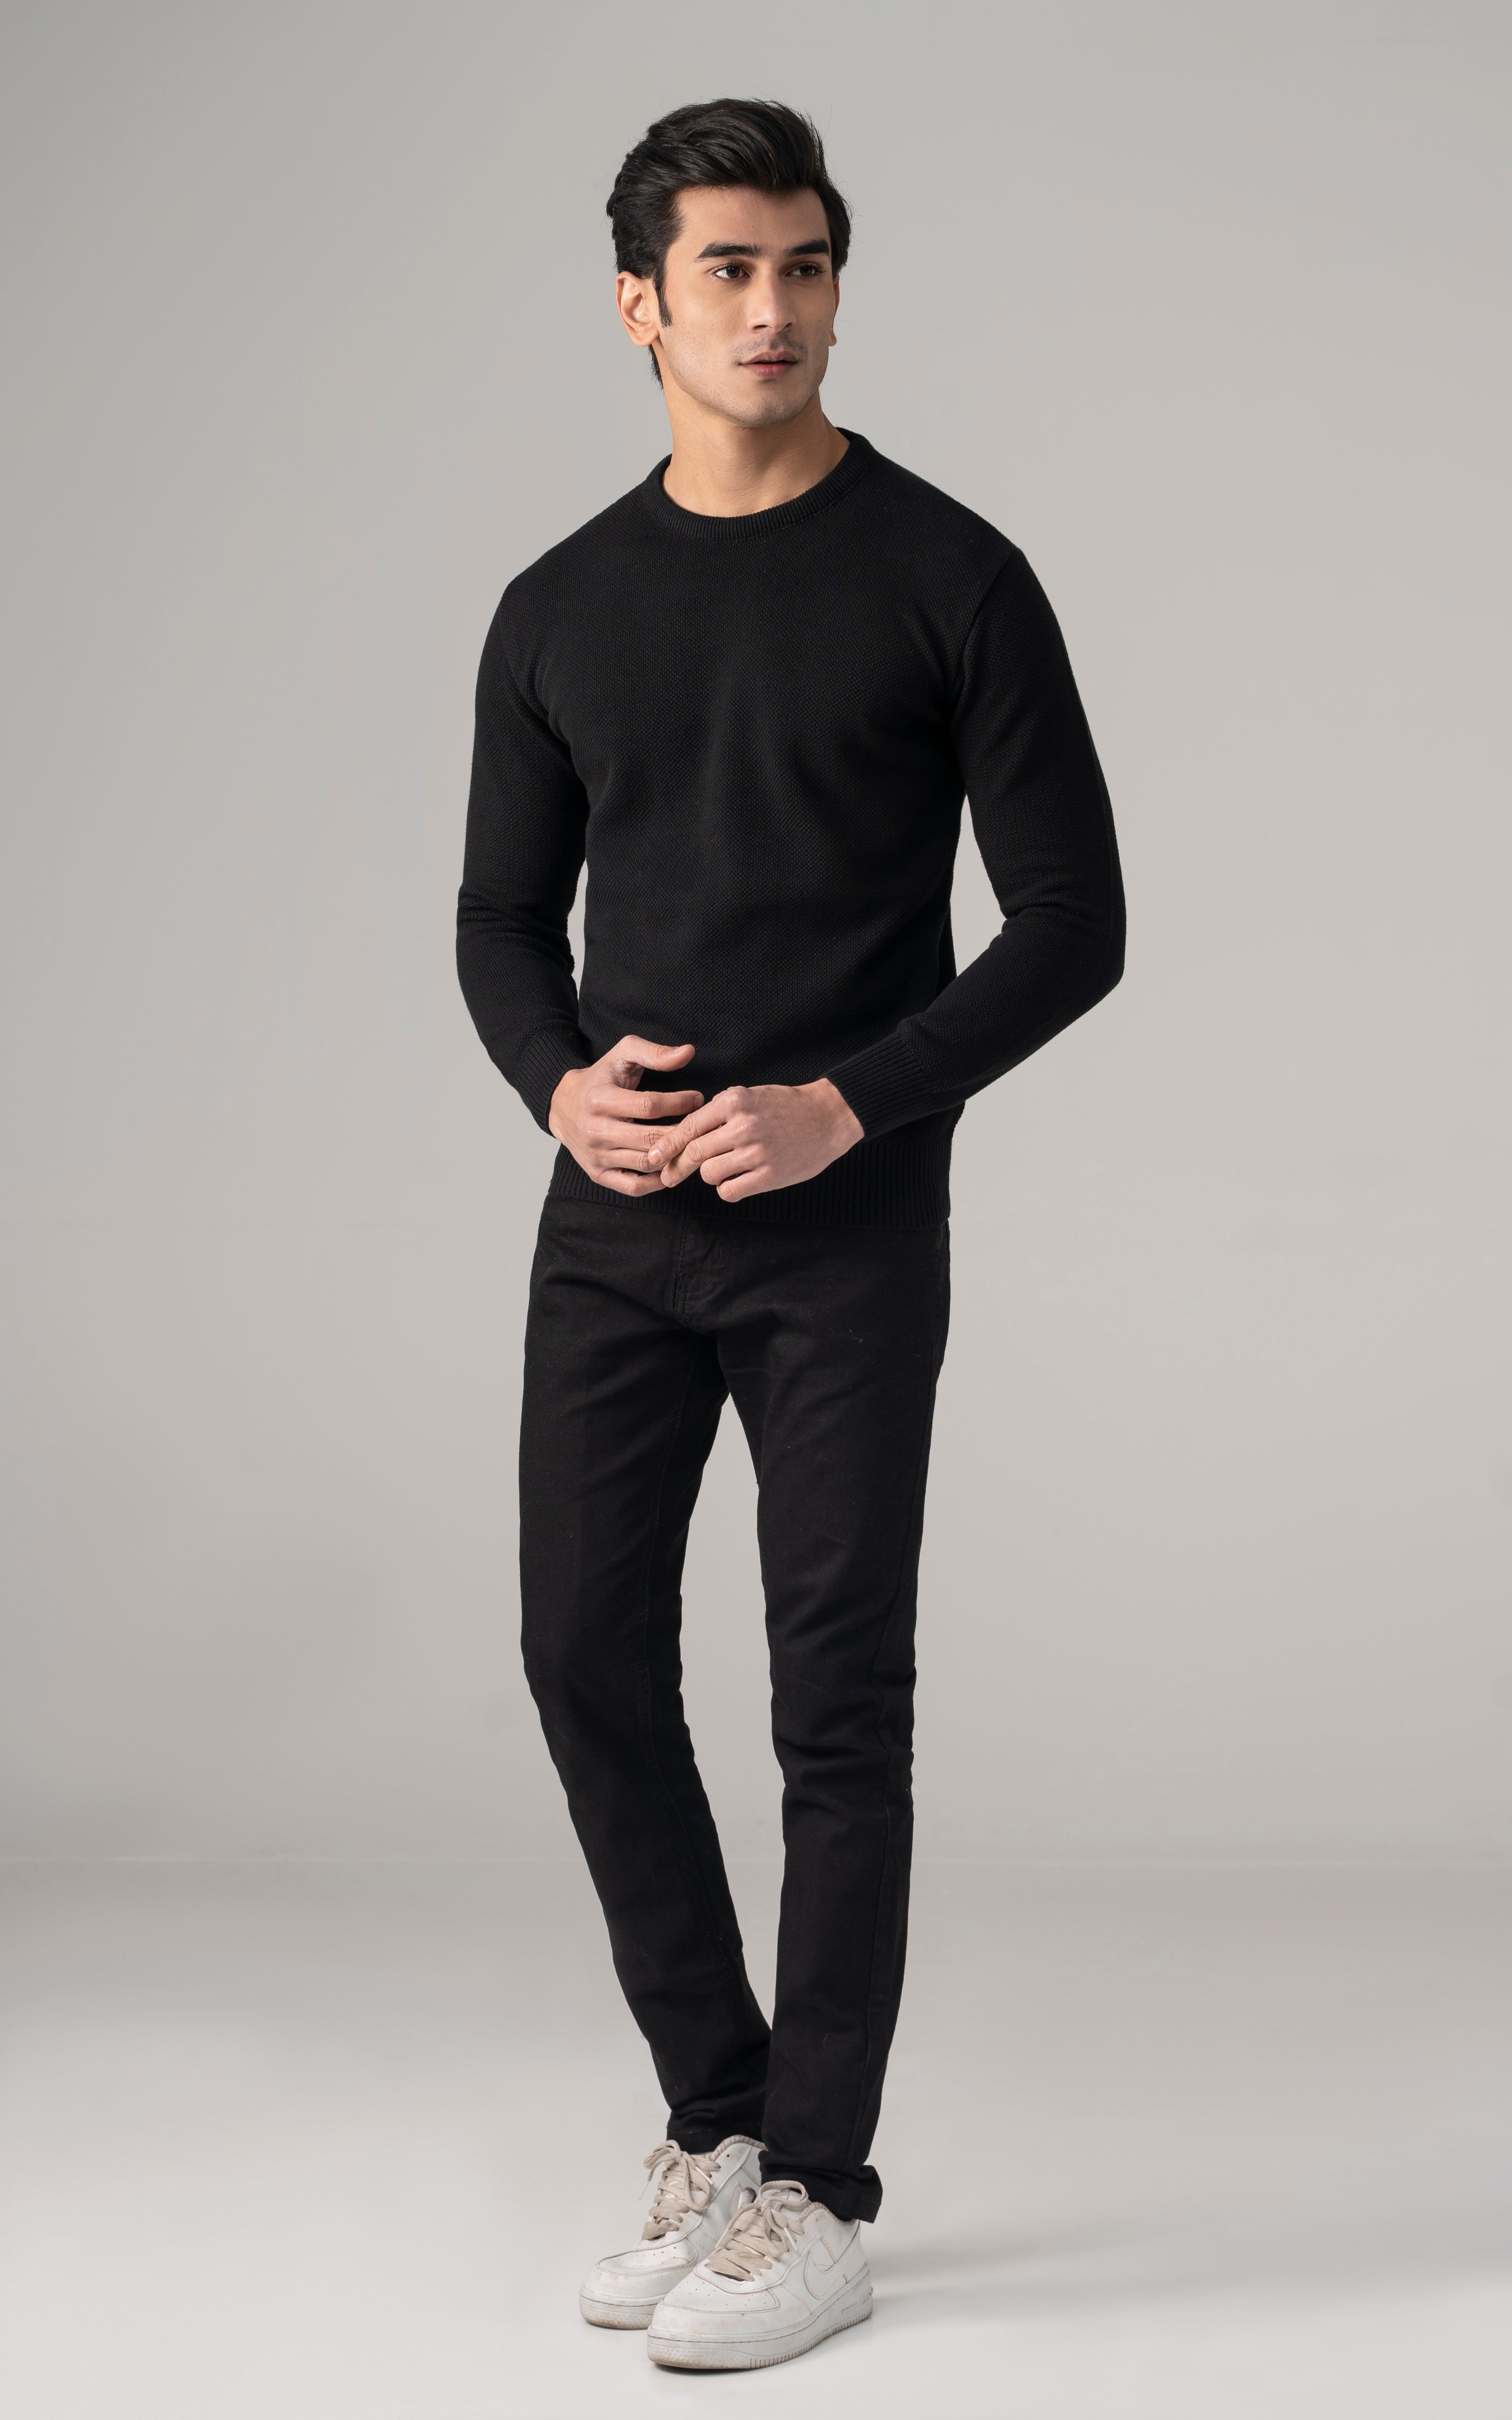 Knitted Crew Neck Black